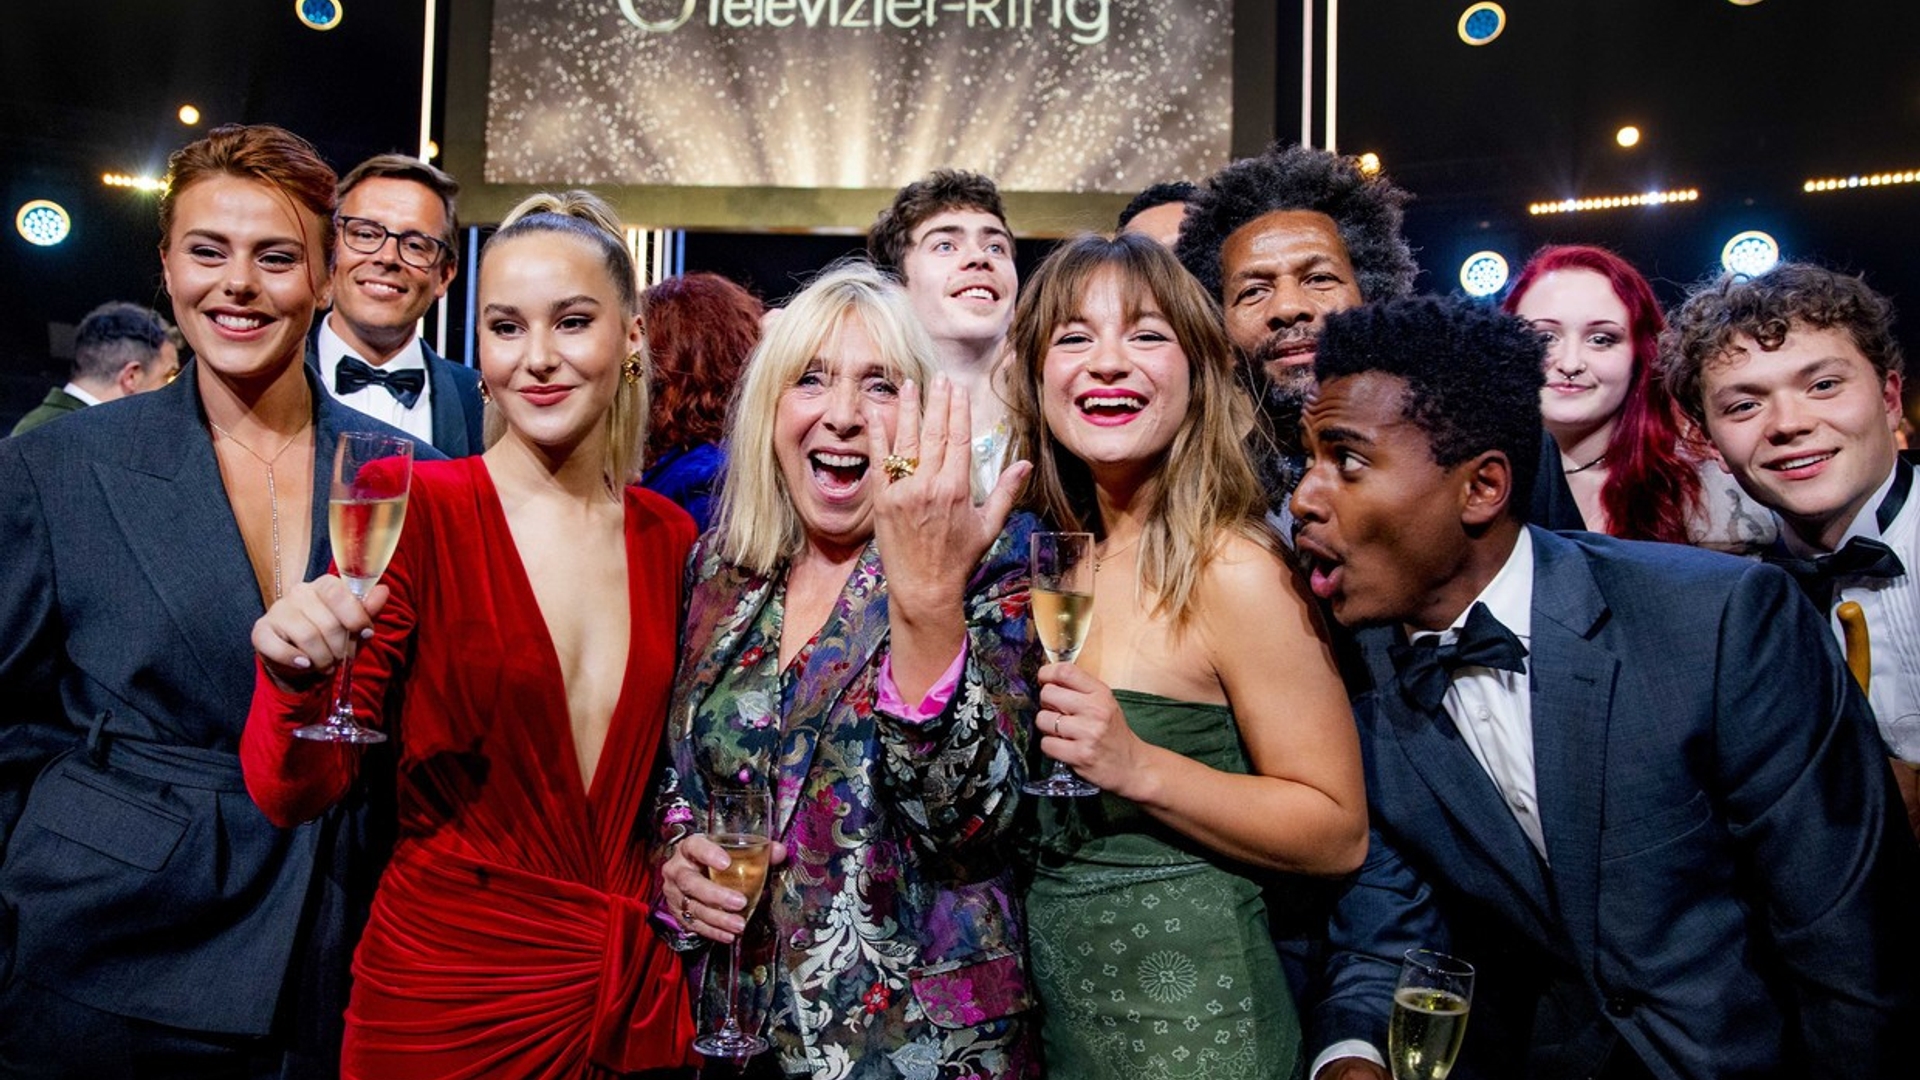 dramaserie-oogappels-wint-gouden-televizier-ring